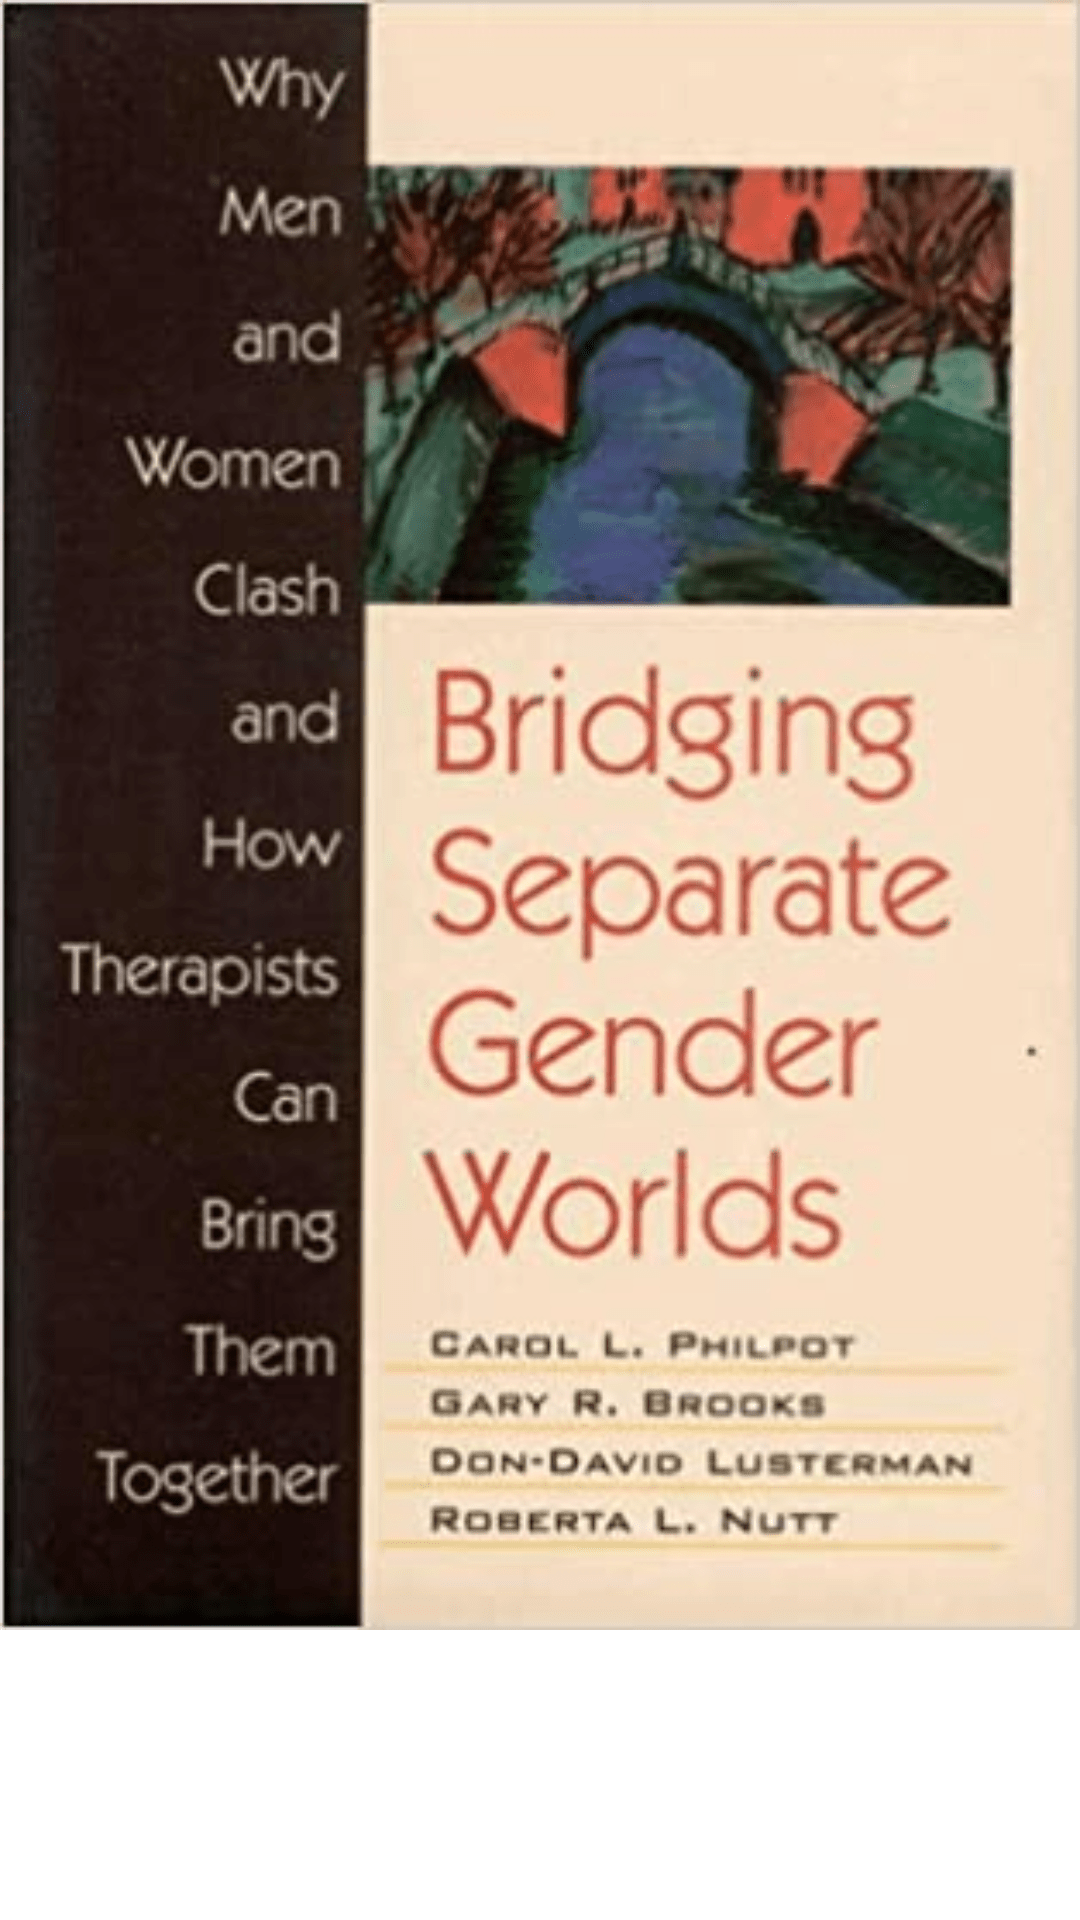 Bridging Separate Gender Worlds: Why Men and Women Clash and How Therapists Can Bring Them Together